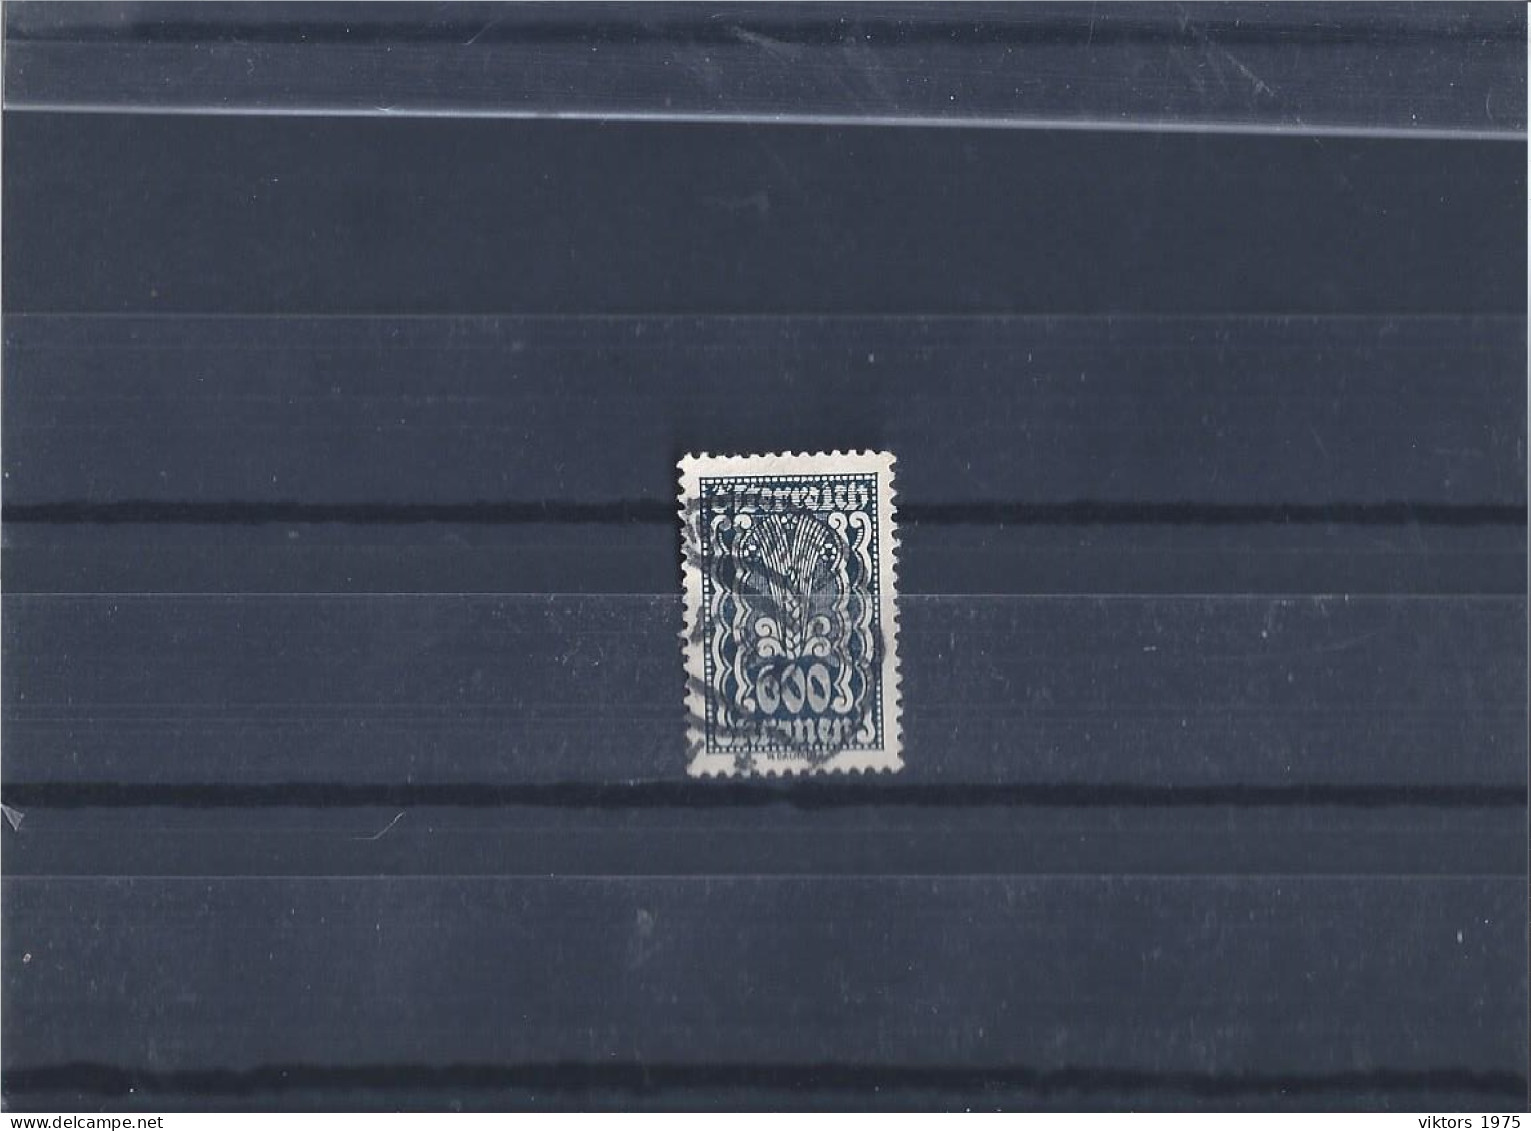 Used Stamp Nr.388 In MICHEL Catalog - Used Stamps